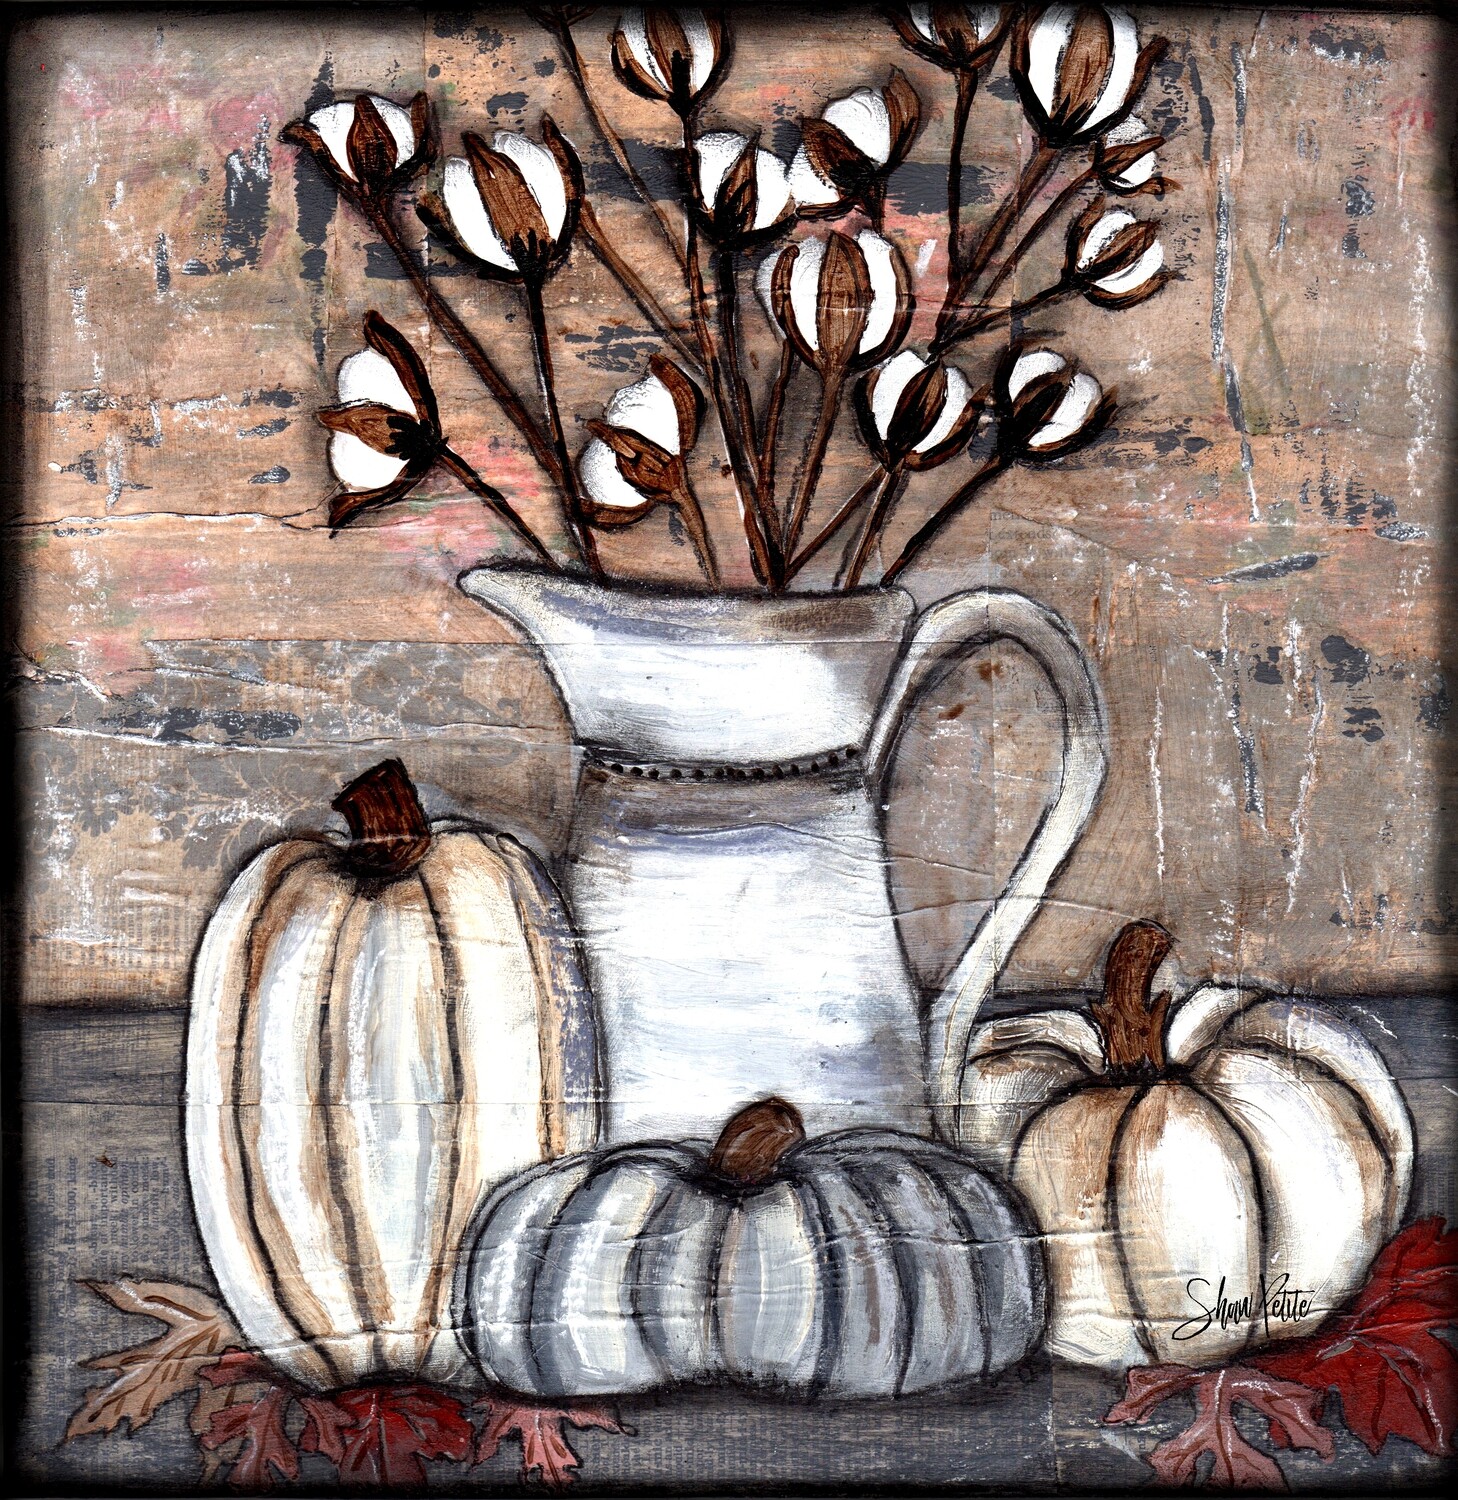 "Rustic Cotton still life" Print on Wood and Print to be Framed